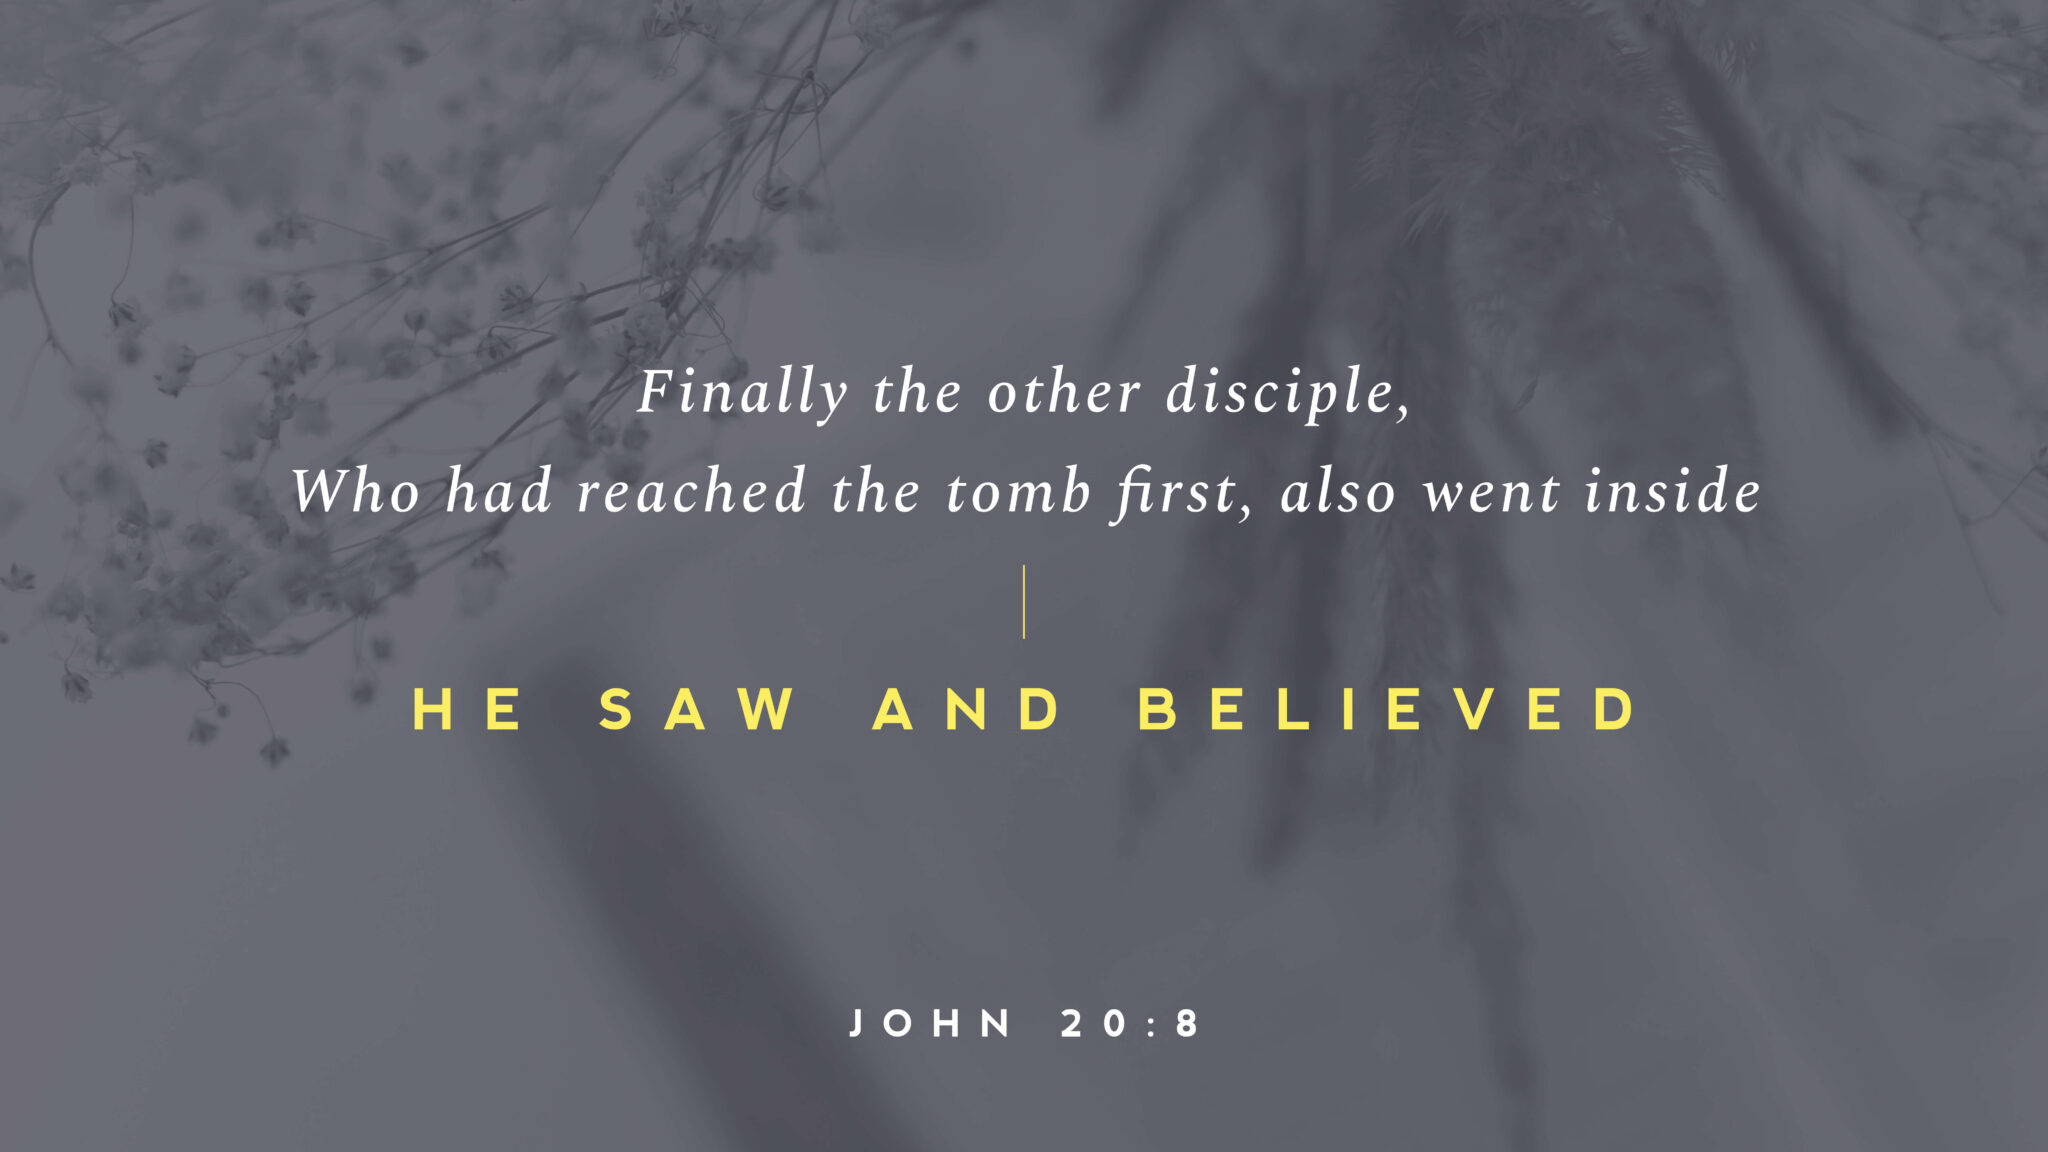 A picture of branches with words that read "Finally the other disciple, Who had reached the tomb fird, also went inside he saw and believed (John 20:8).